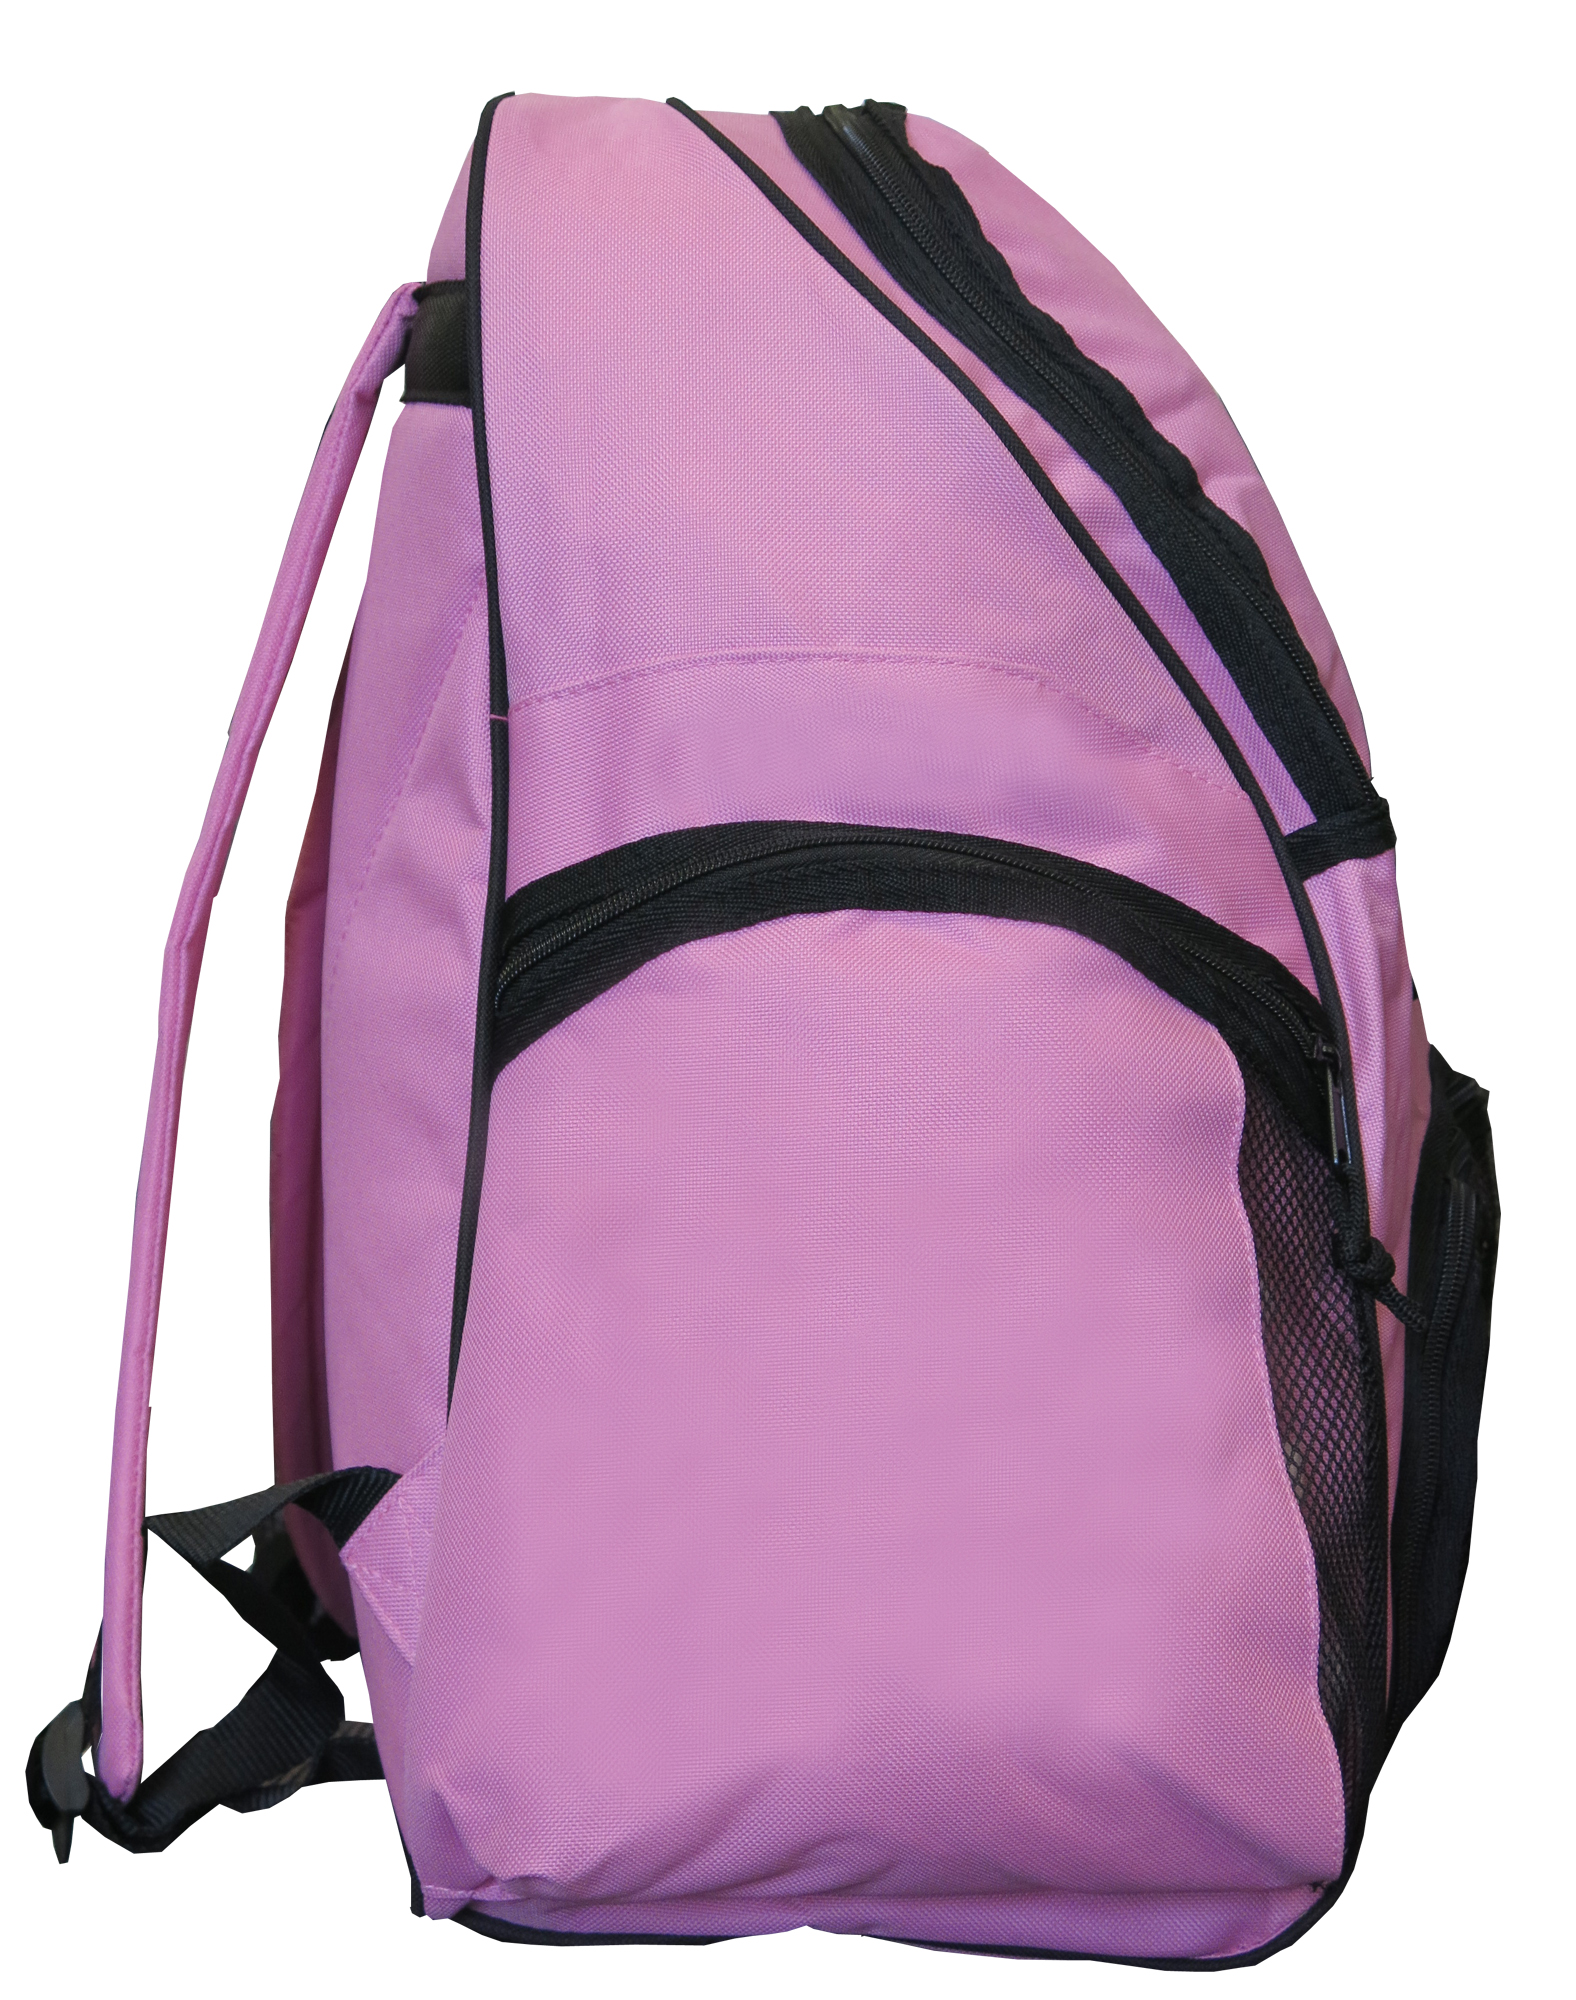 Girls Pink Ribbon Soccer Backpack or Womens Pink Ribbon Volleyball Bag - image 4 of 4